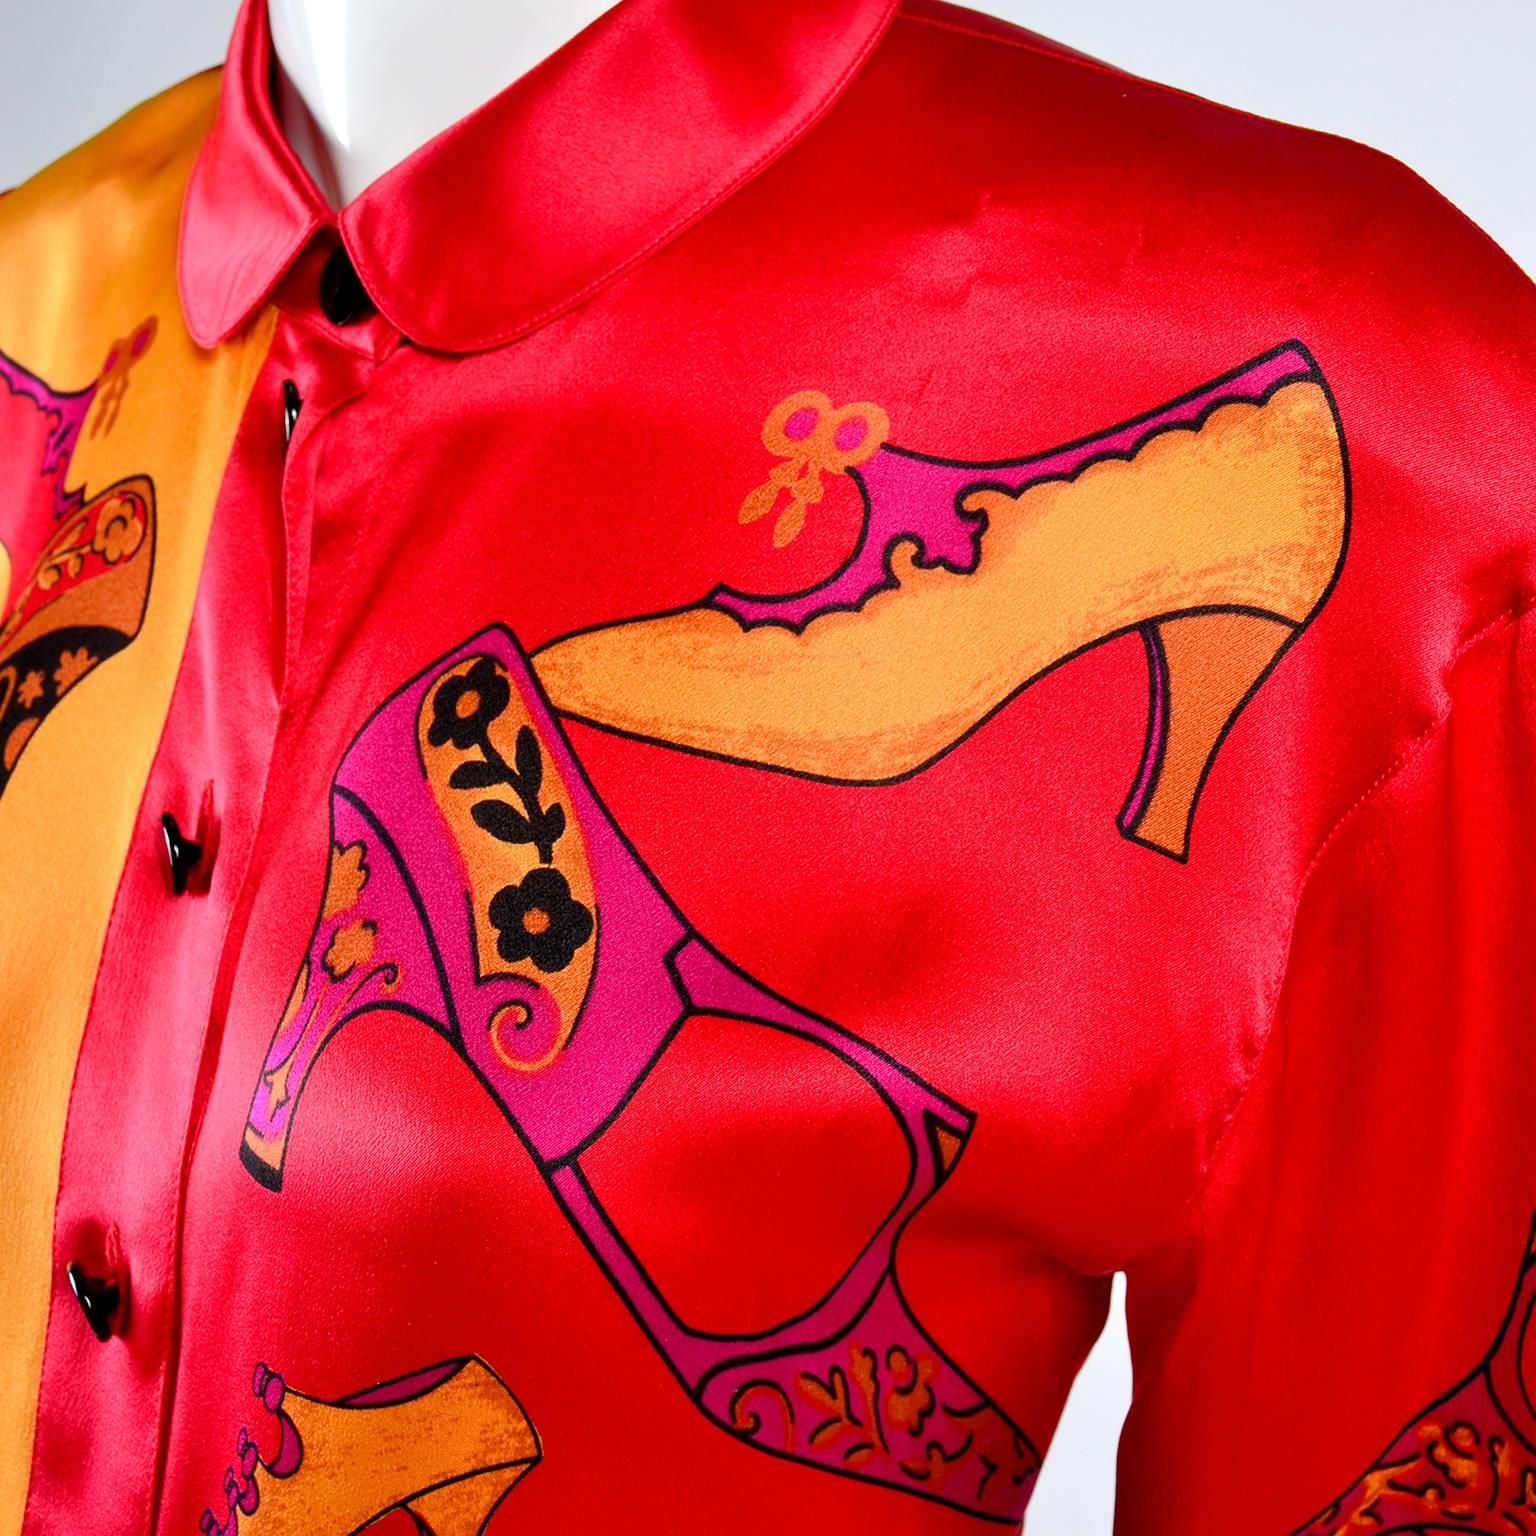 This fun Escada vintage silk blouse was designed by Margaretha Ley in the 1980's.  The blouse is in a red and gold novelty print silk with pointed shoes in red, pink, yellow and purple.  The blouse is labeled a European size 36 and buttons up the